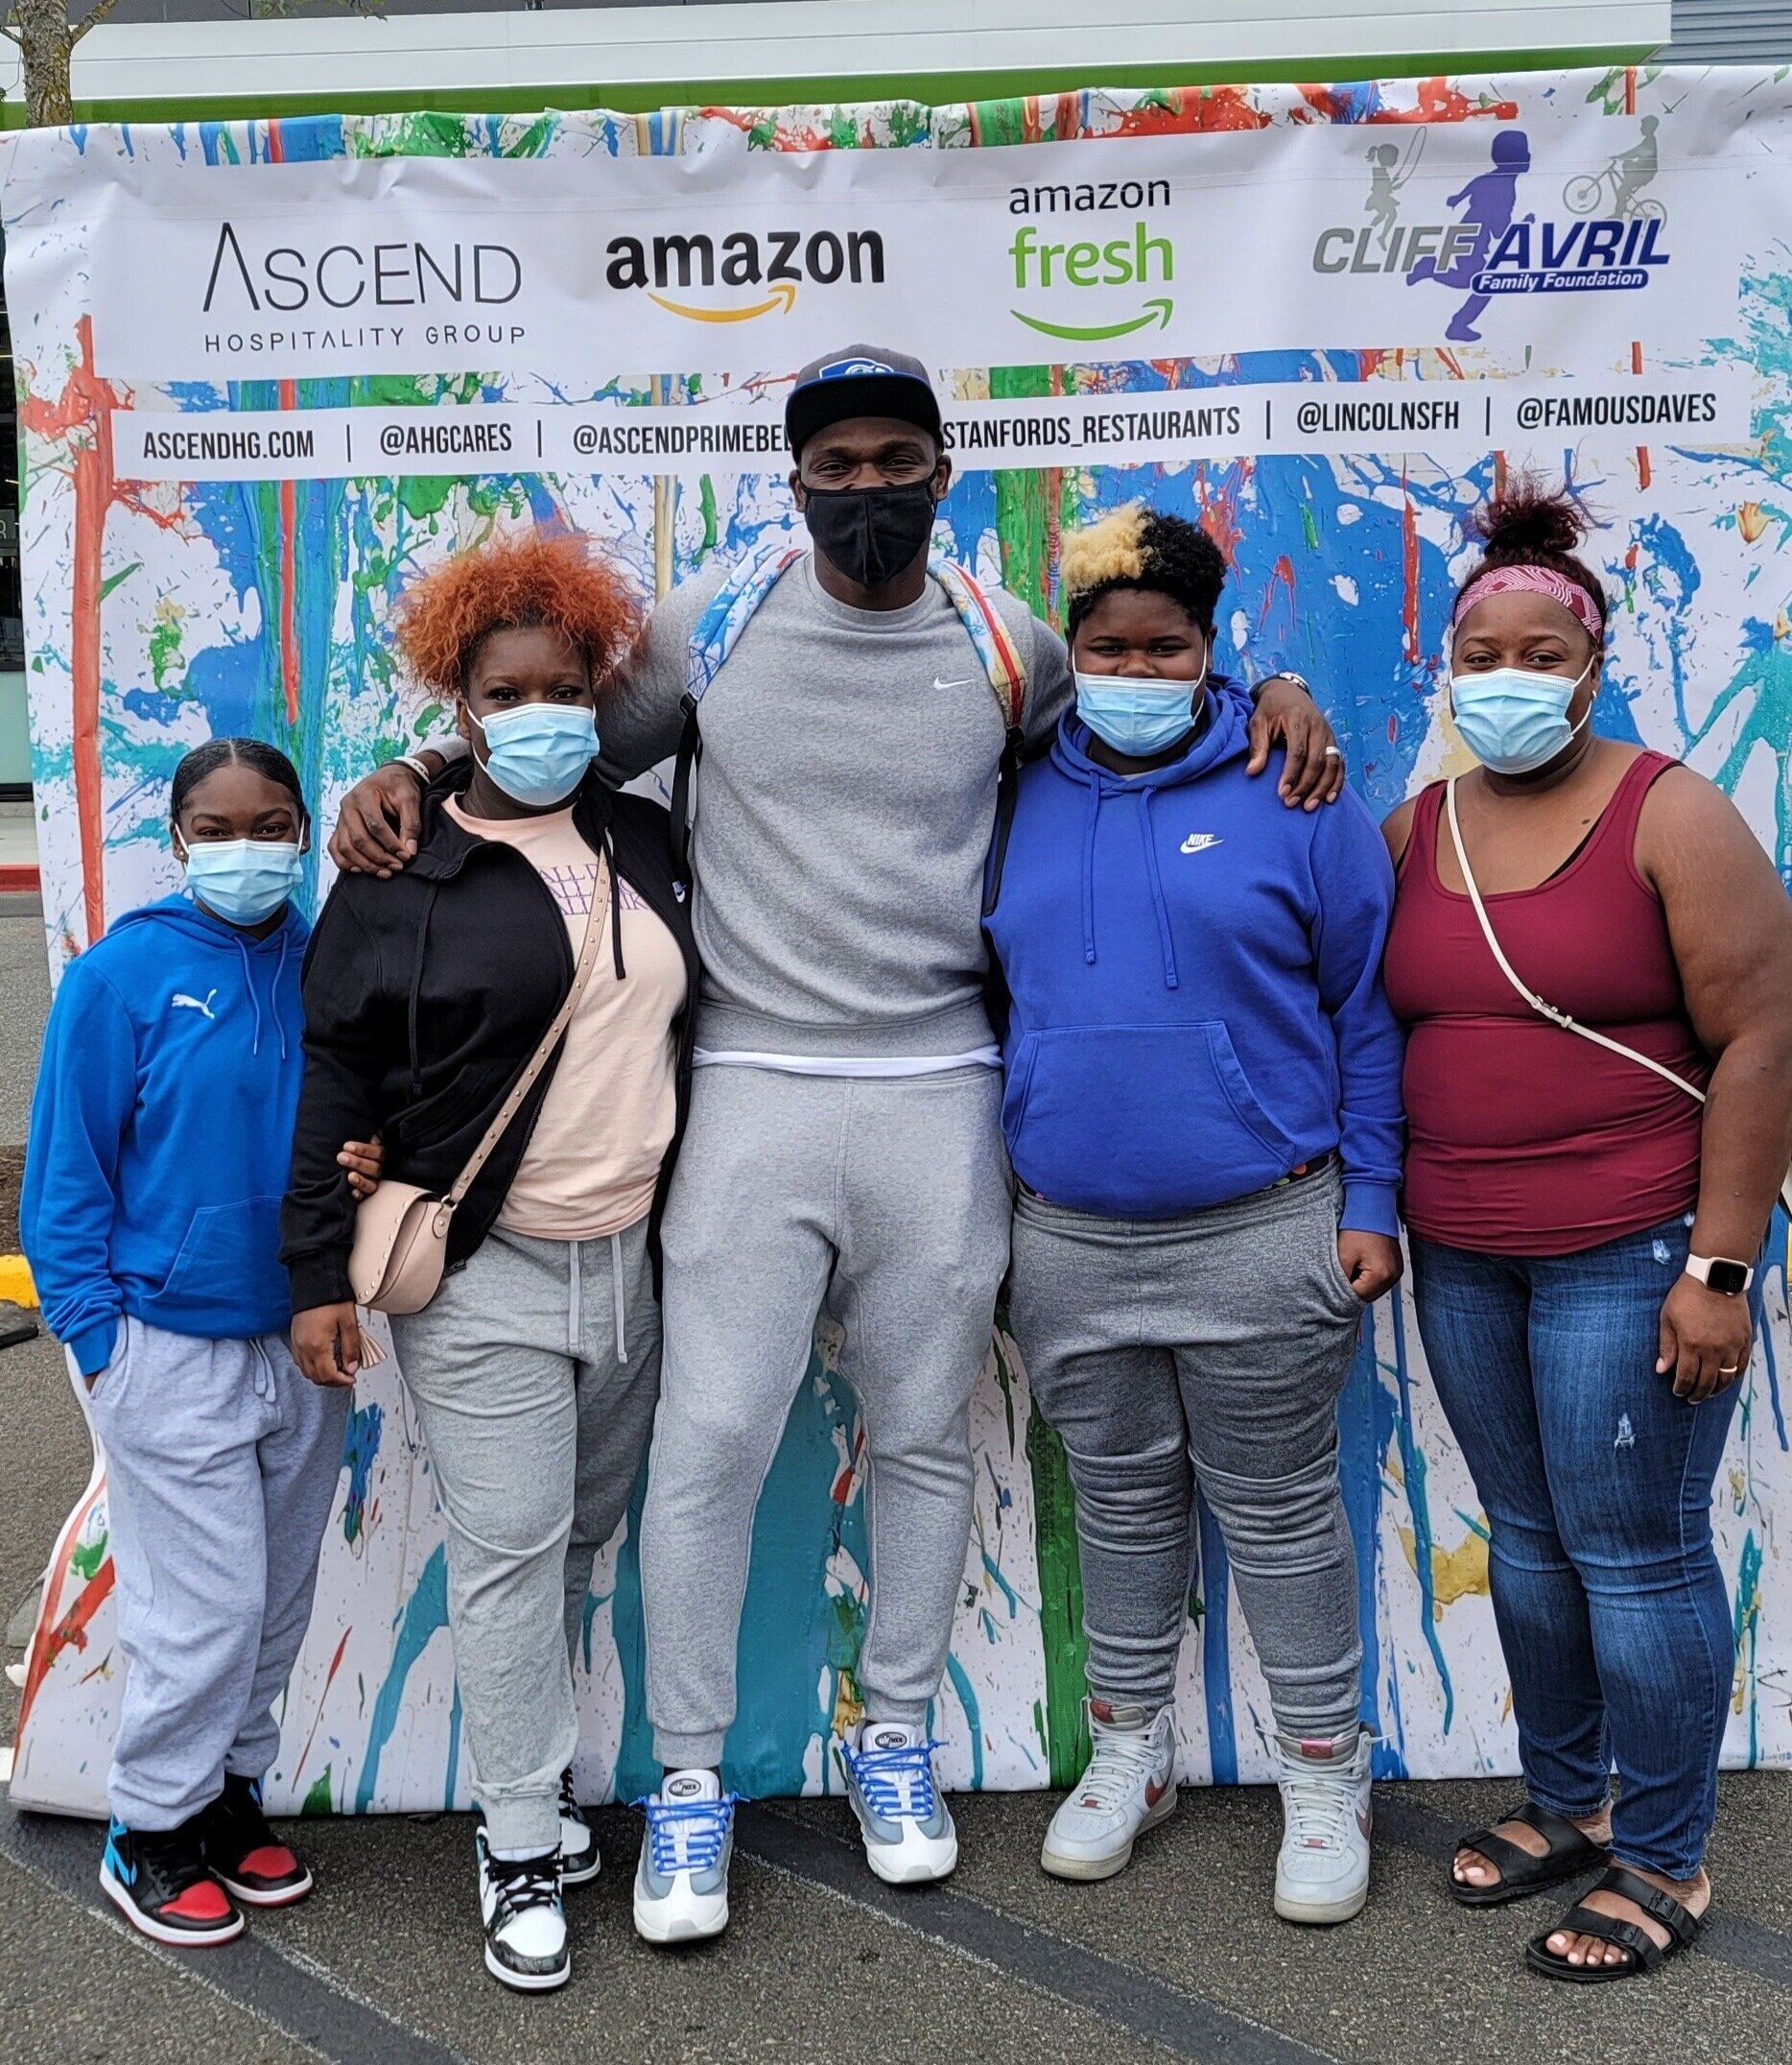 RA, Cliff Avril, Ascend and Amazon 